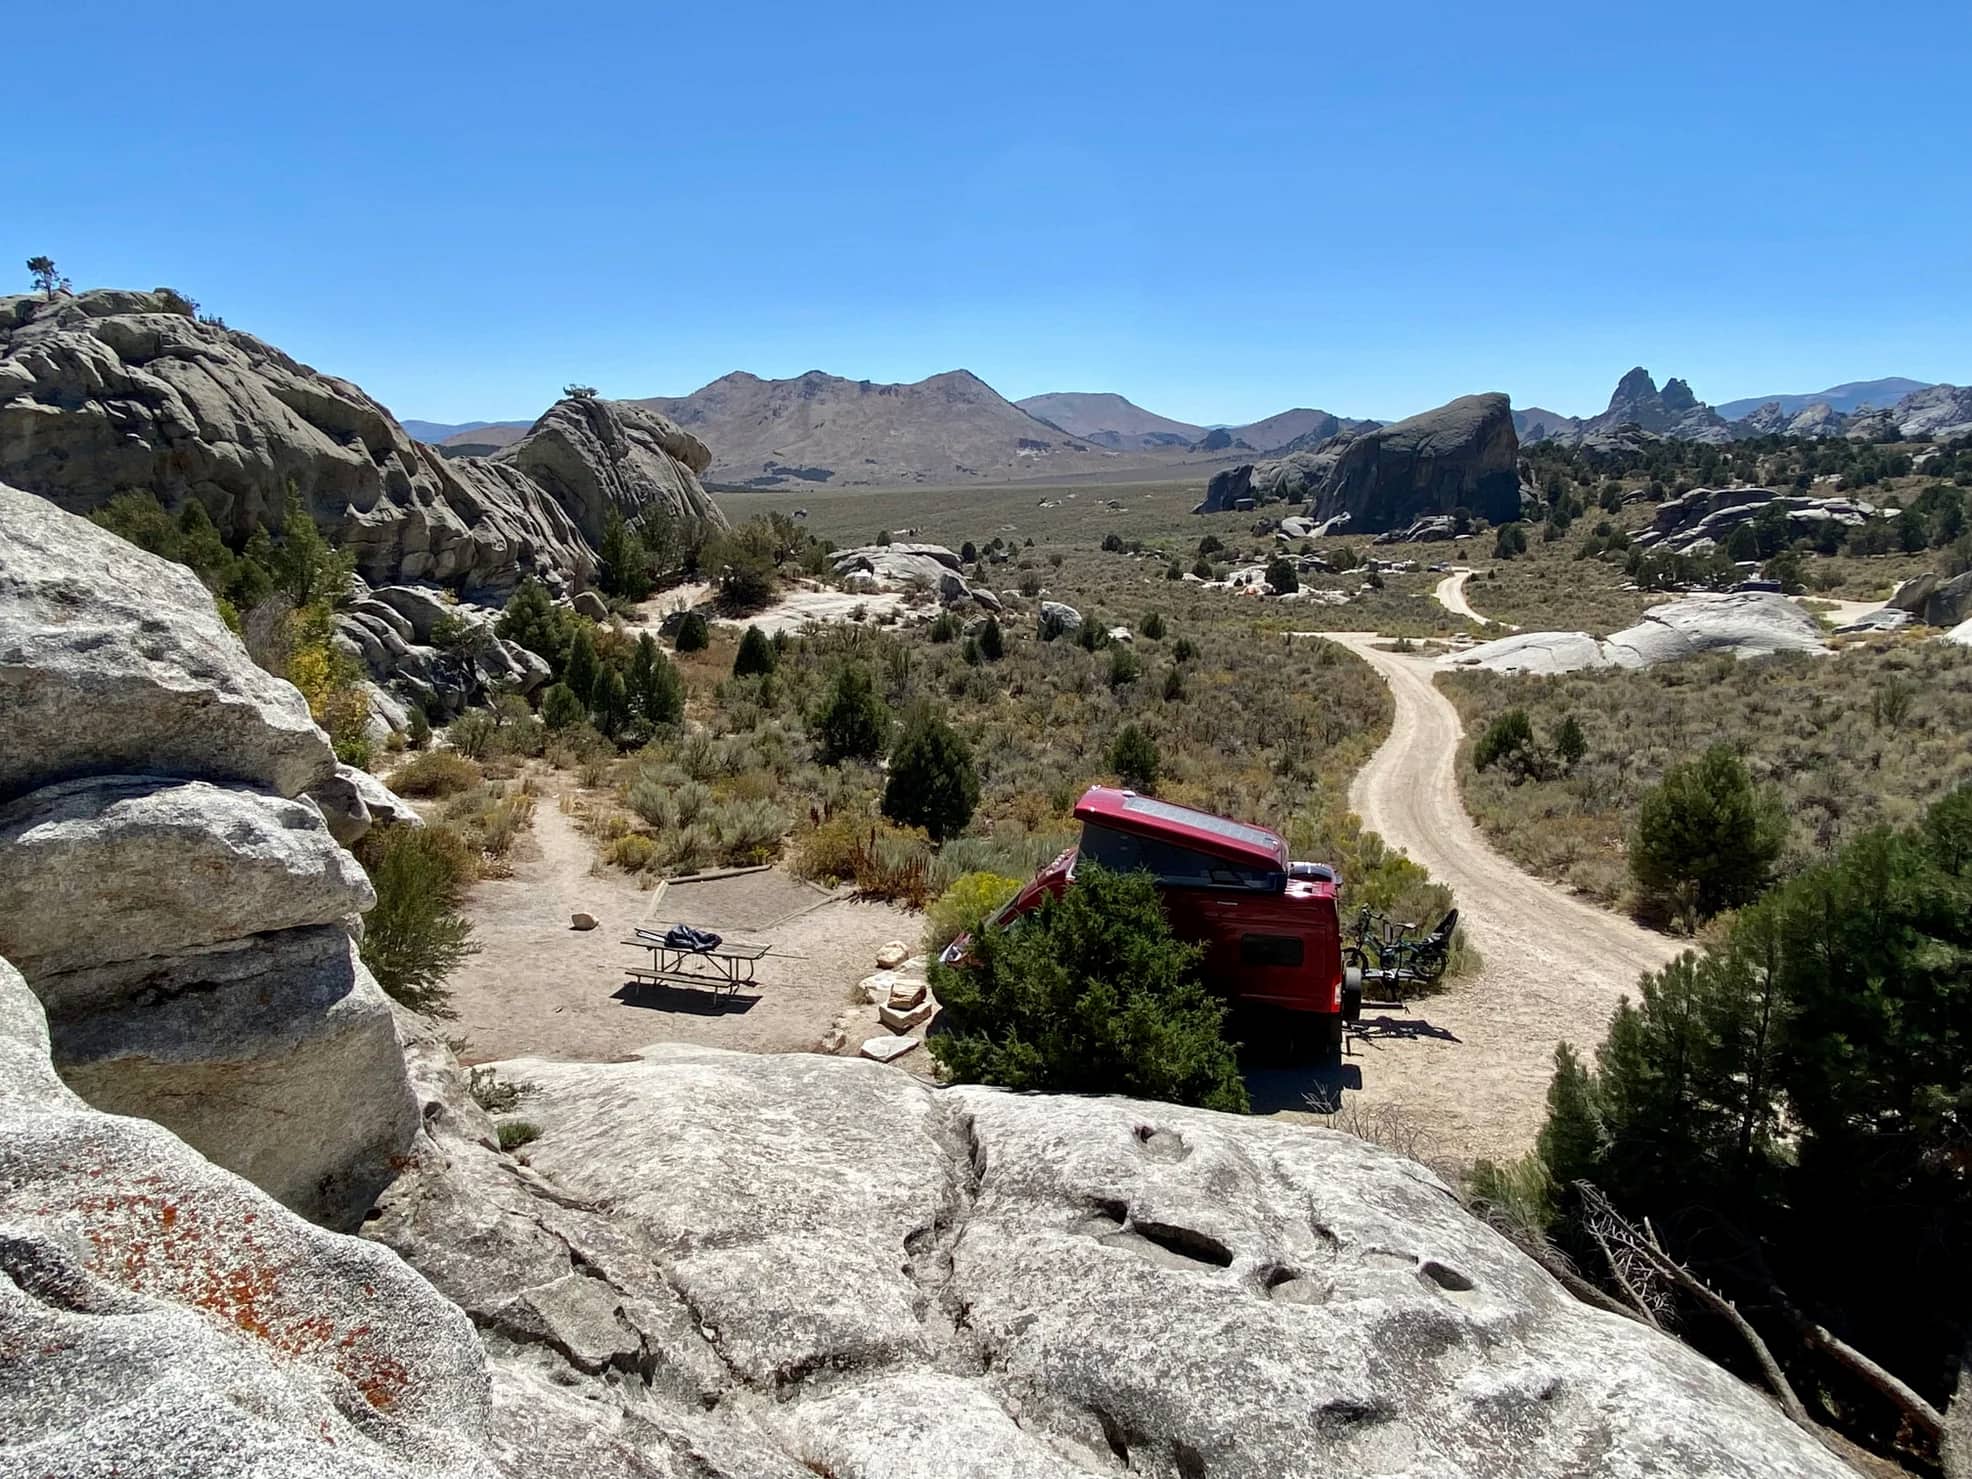 Red pop up camper van parked in campsite down a winding road surrounded by rock formations.